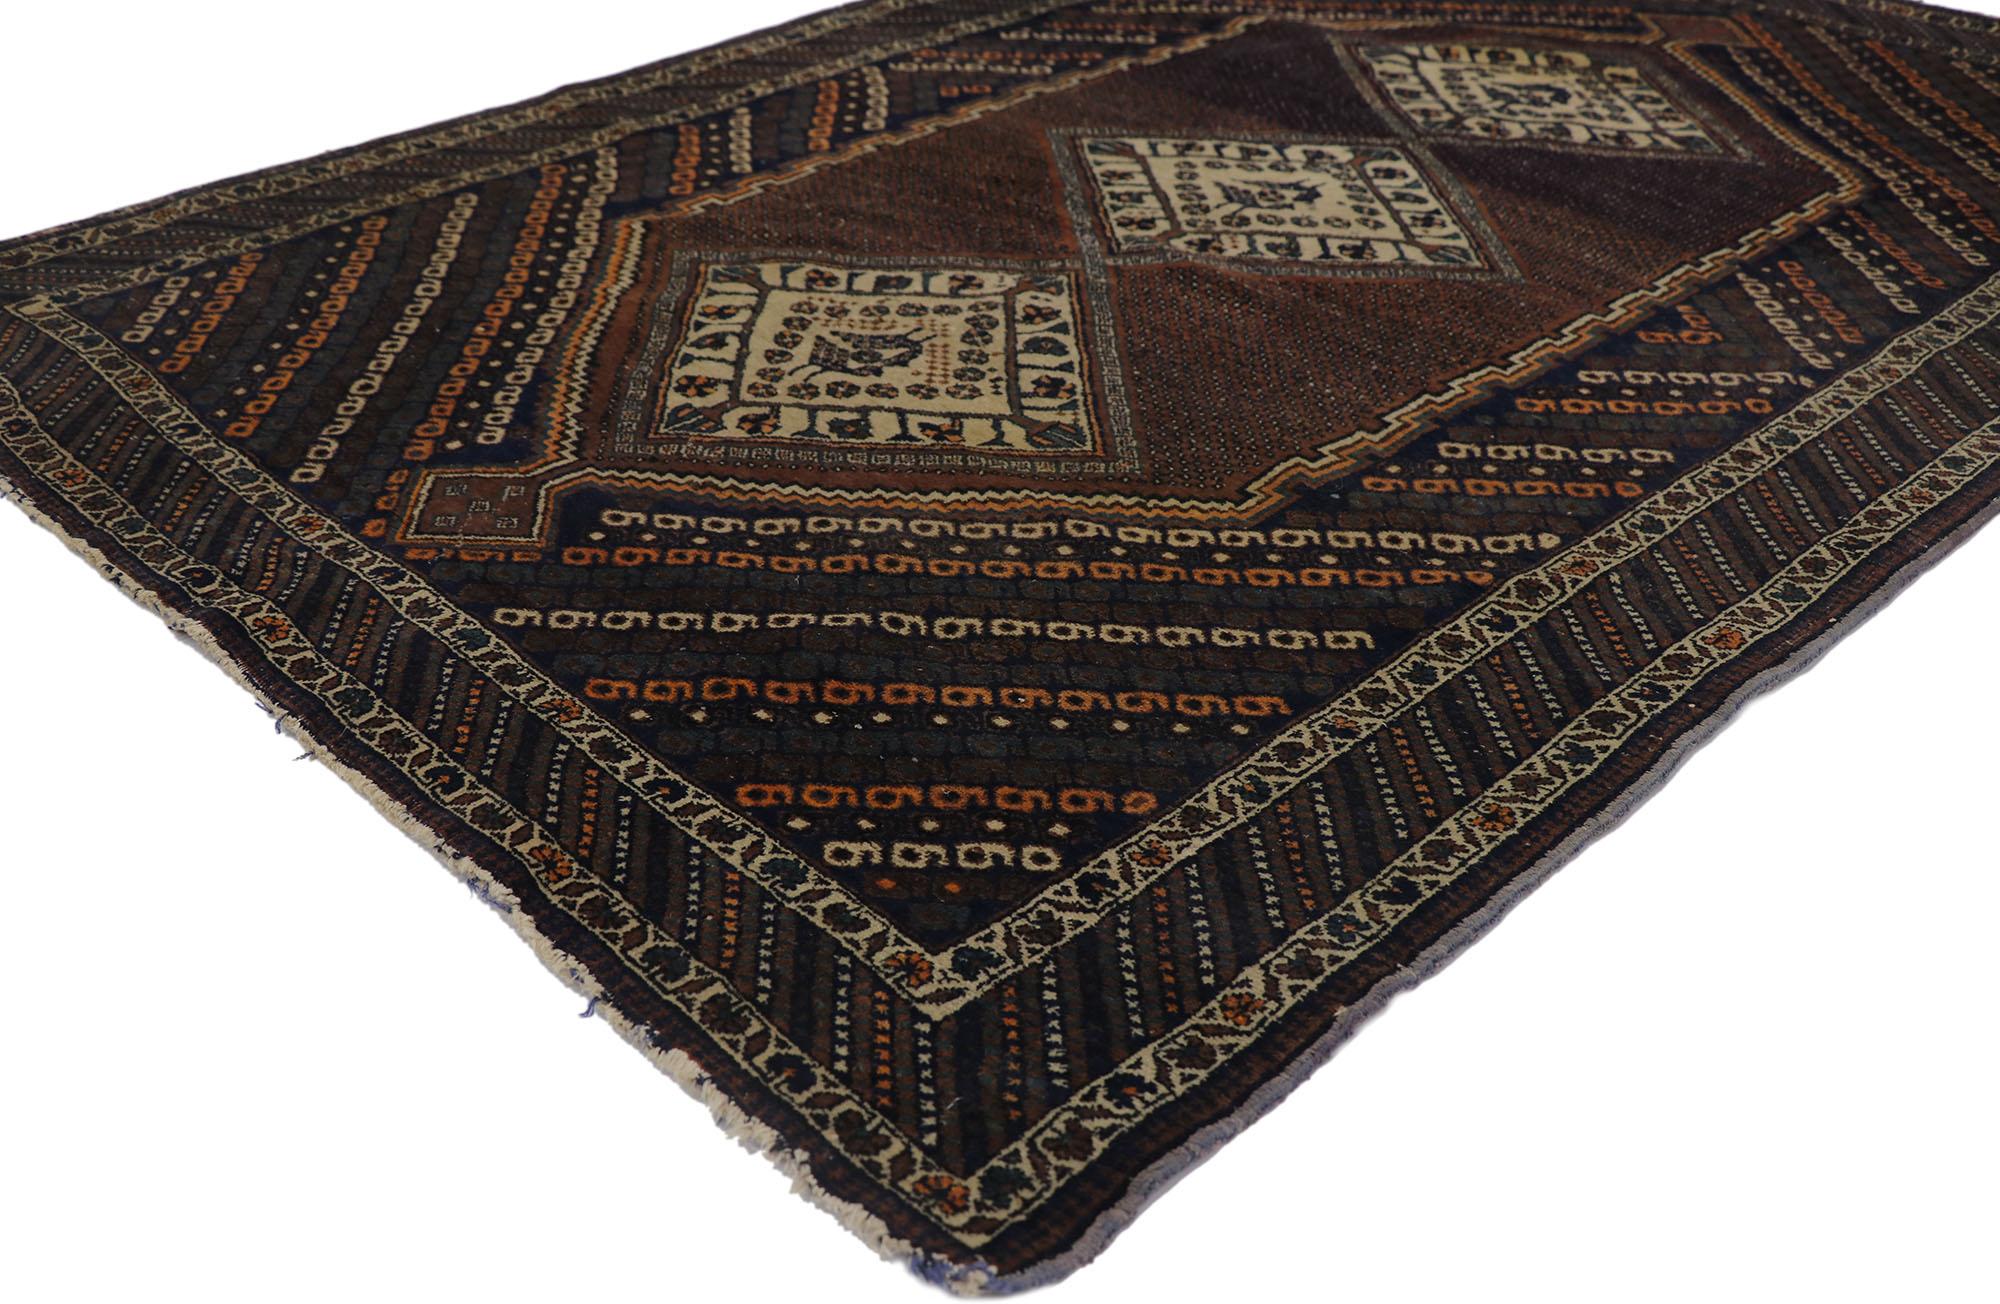 21687 Antique Persian Afshar rug with Nomadic Tribal style 04'01 x 05'10. Warm and inviting with a dark and moody color palette, this hand-knotted wool antique Persian Afshar is poised to impress. The abrashed brown field features three sandy-beige